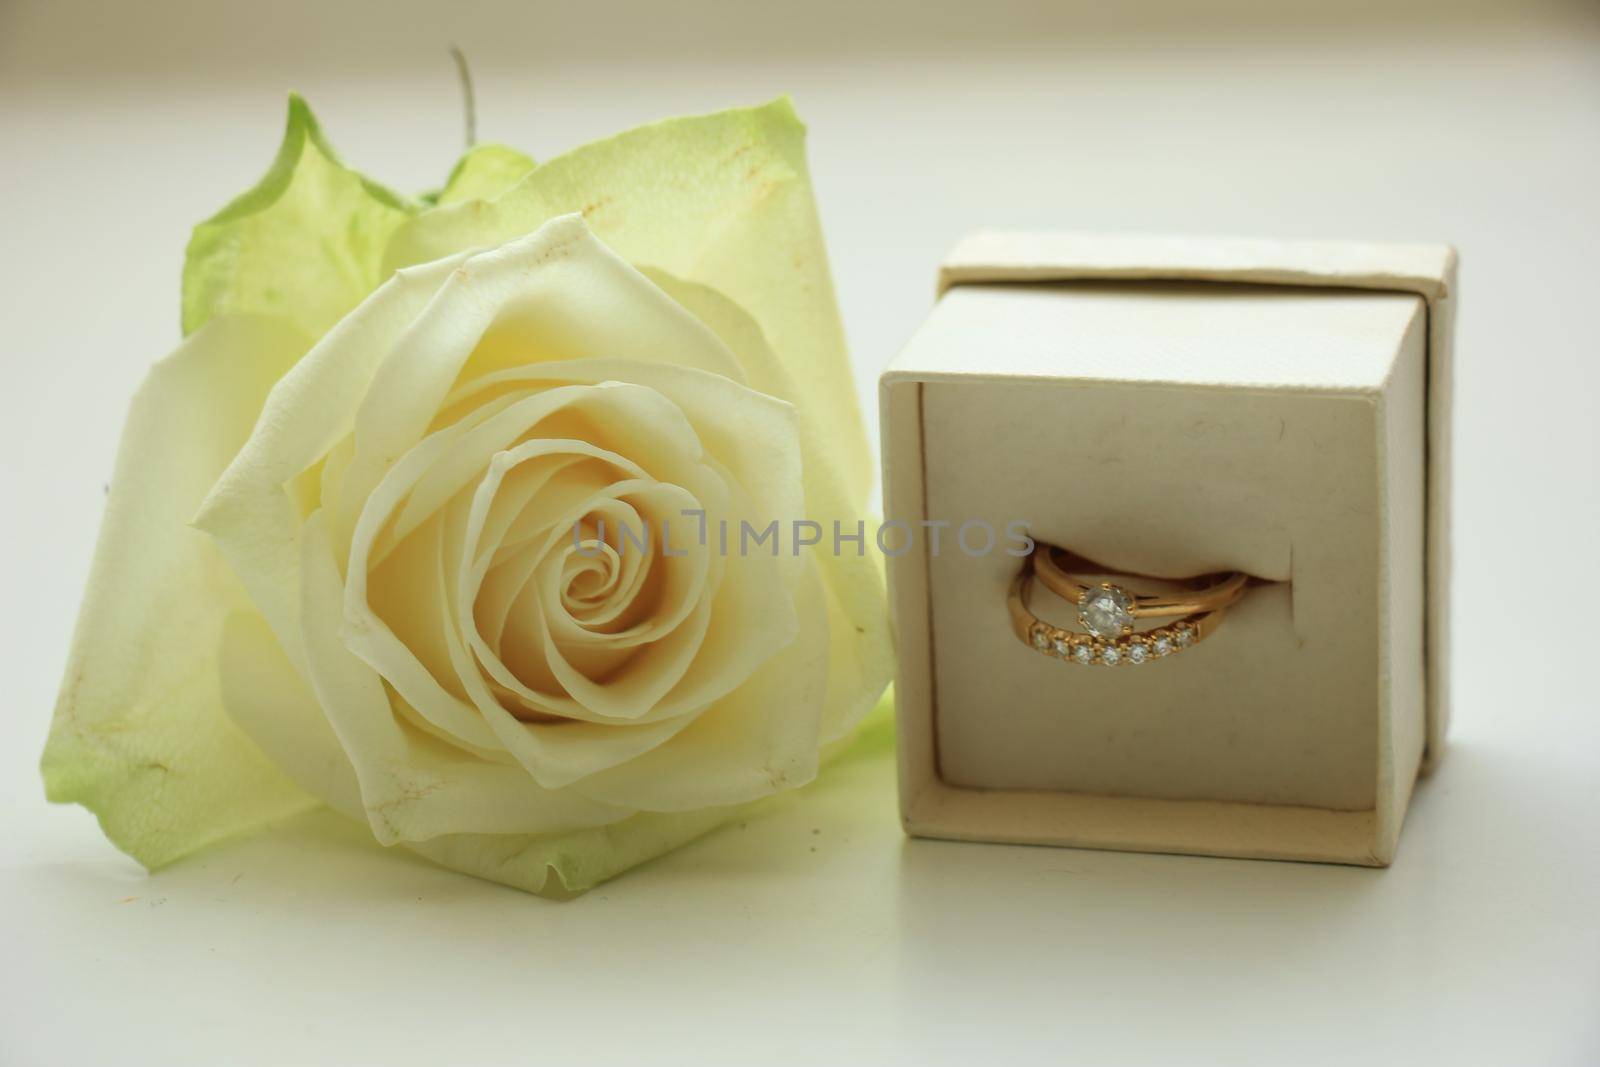 Engagement rings in box and white rose